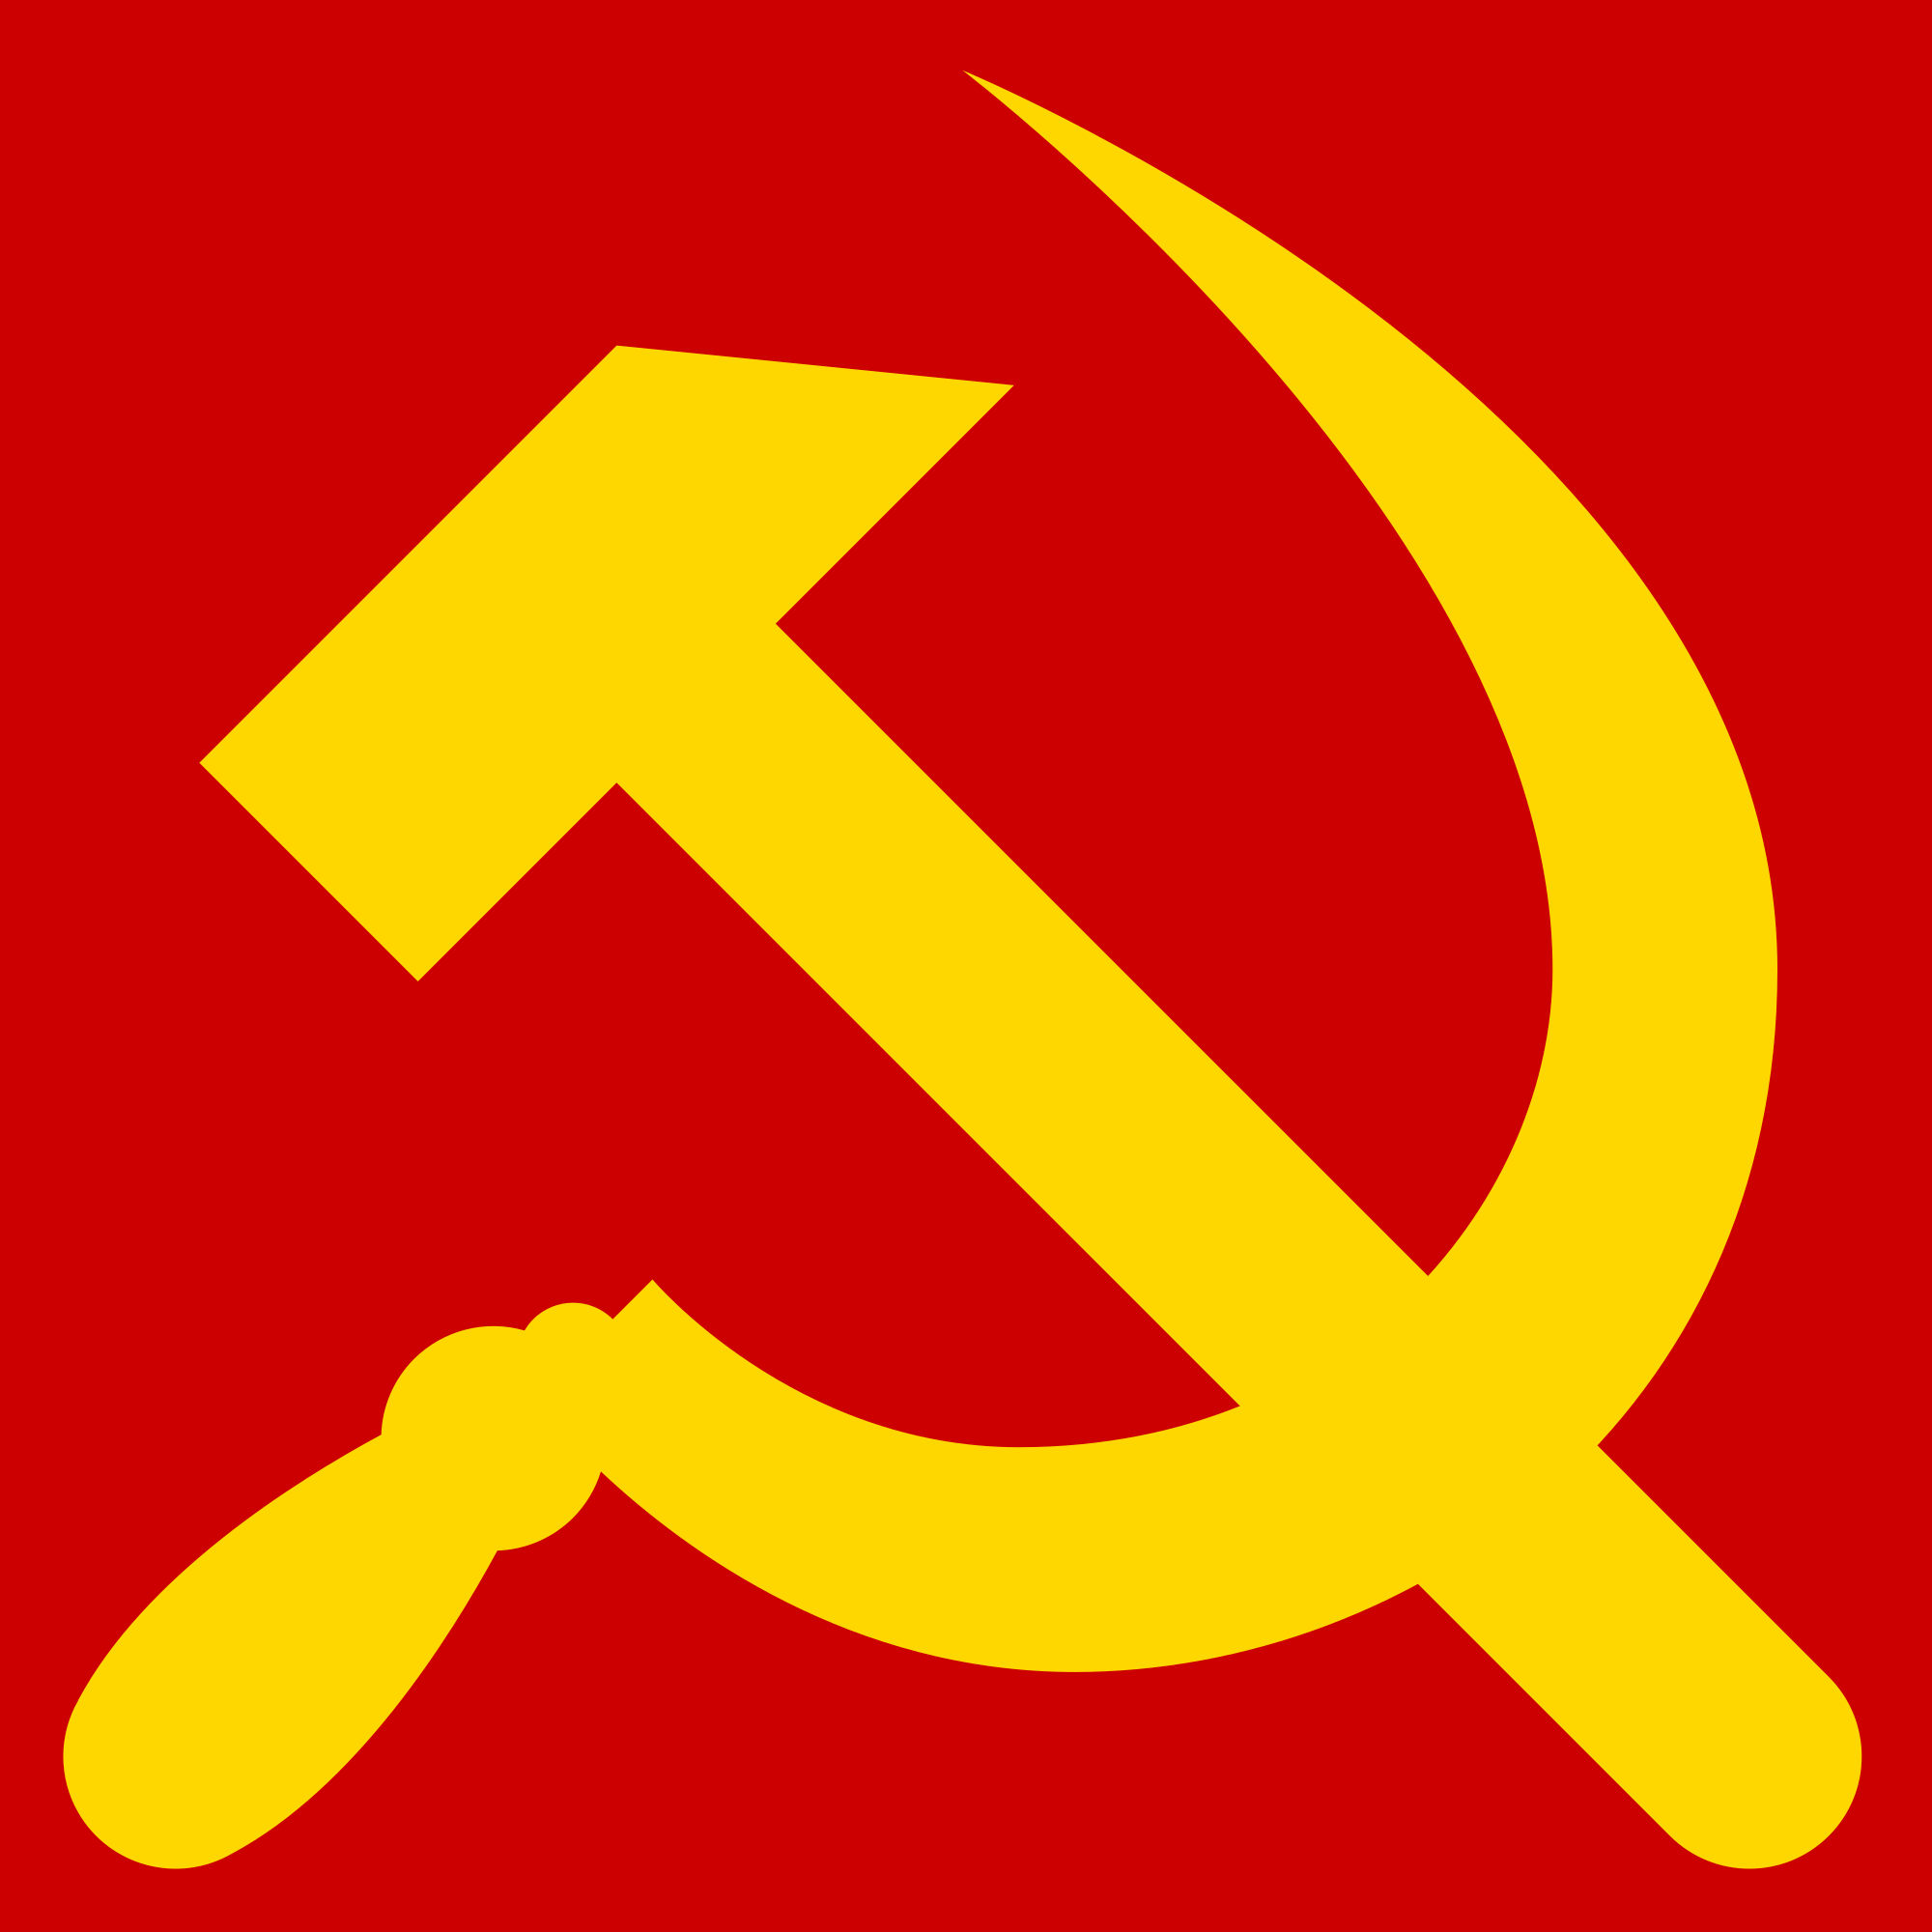 2000px-Hammer_and_sickle.svg.png